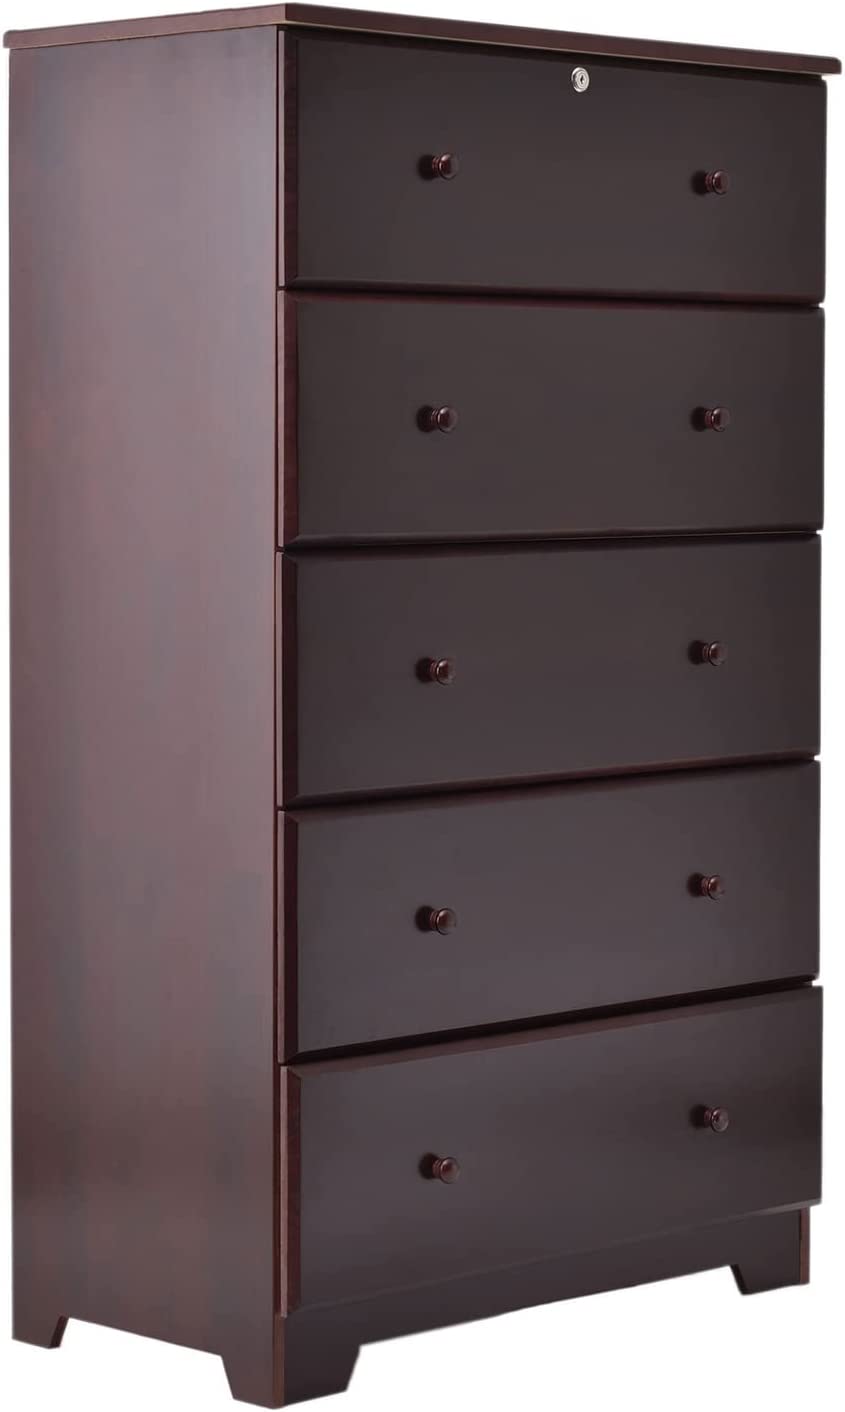 Better Home Products Isabela Solid Pine Wood 5 Drawer Chest Dresser in Mahogany